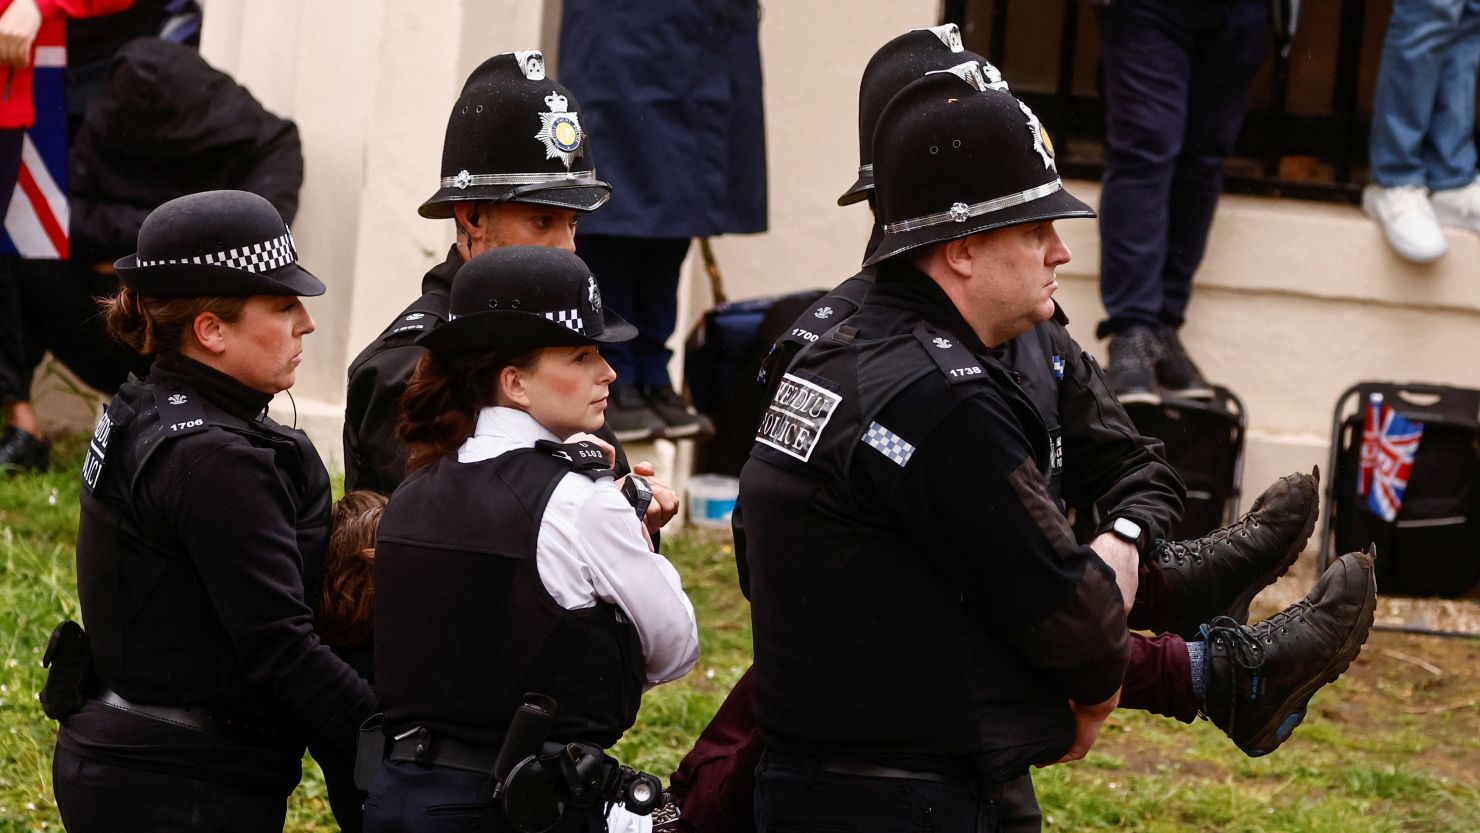 Police officers detain a member of "Just Stop Oil" movement during a protest ahead of King Charles' procession to his coronation ceremony, at The Mall in London, on May 6, 2023. 